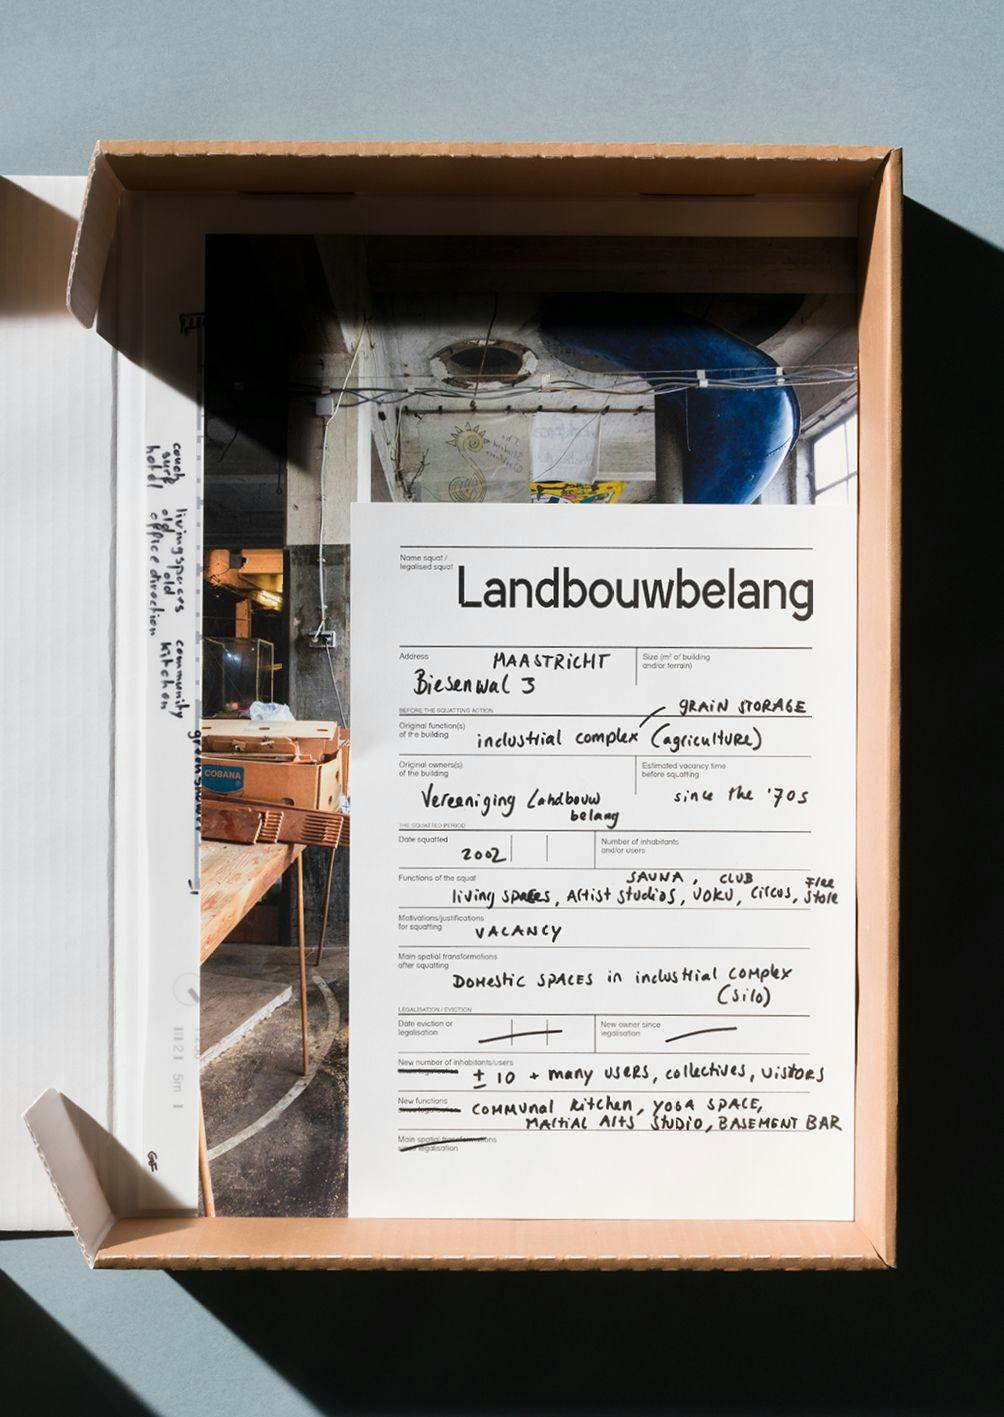 Landbouwbelang. From: Architecture of Appropriation. On Squatting as Spatial Practice. Photo by Johannes Schwartz. 